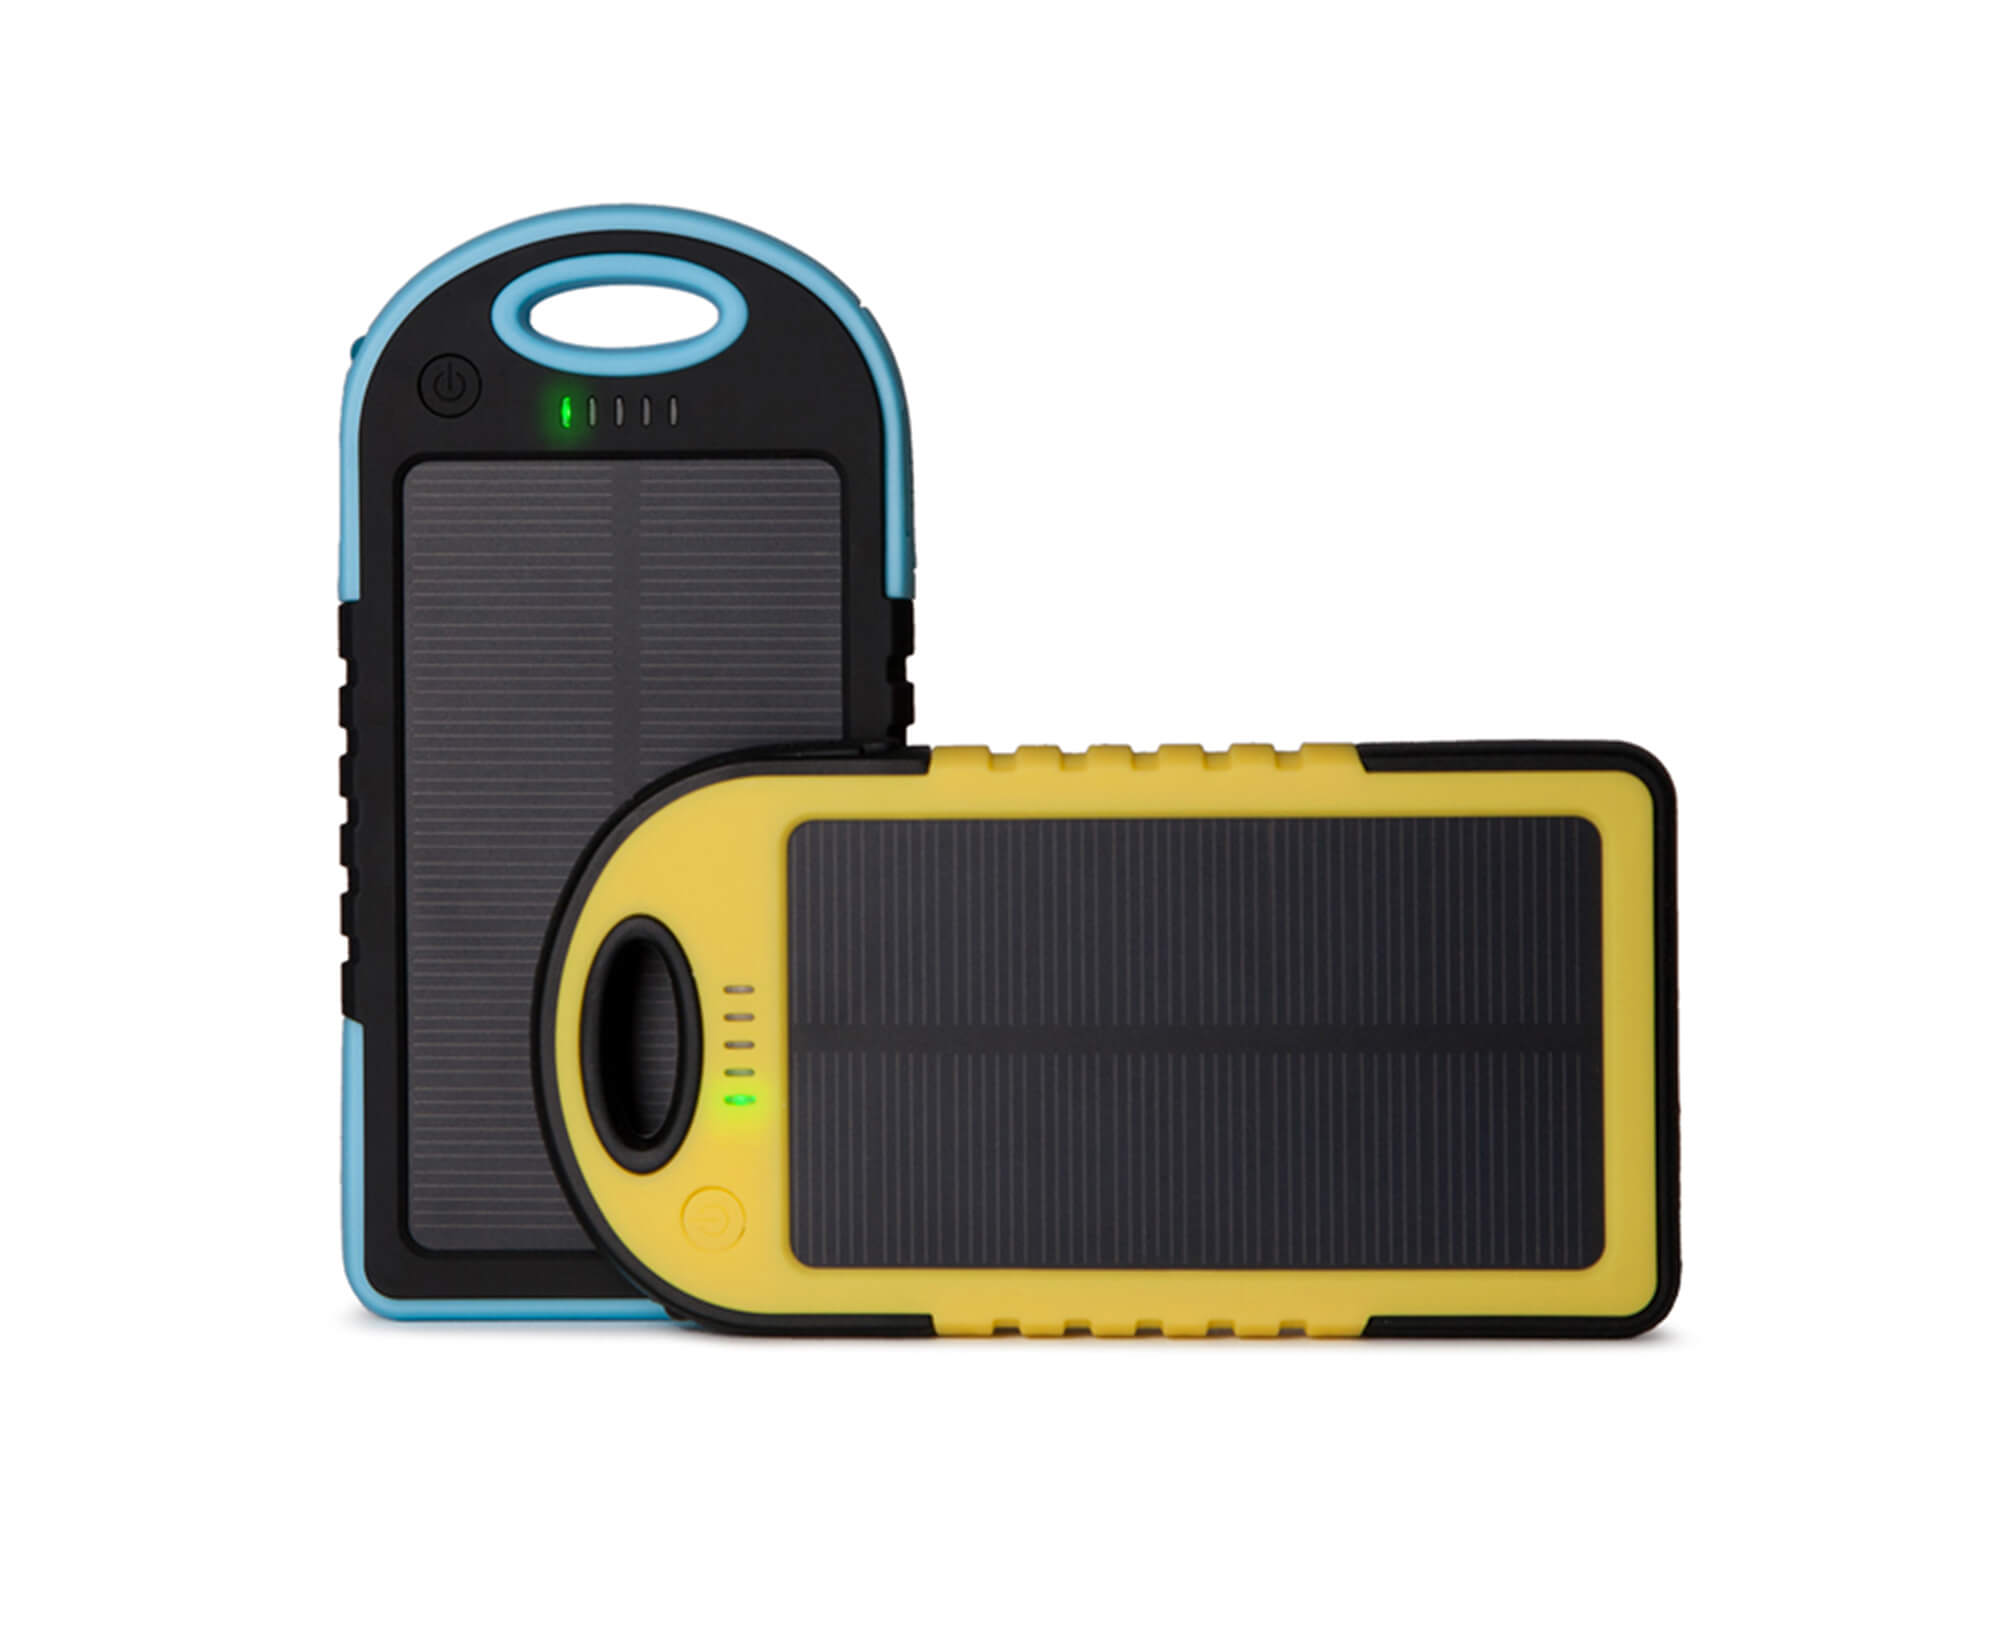 solarcharger